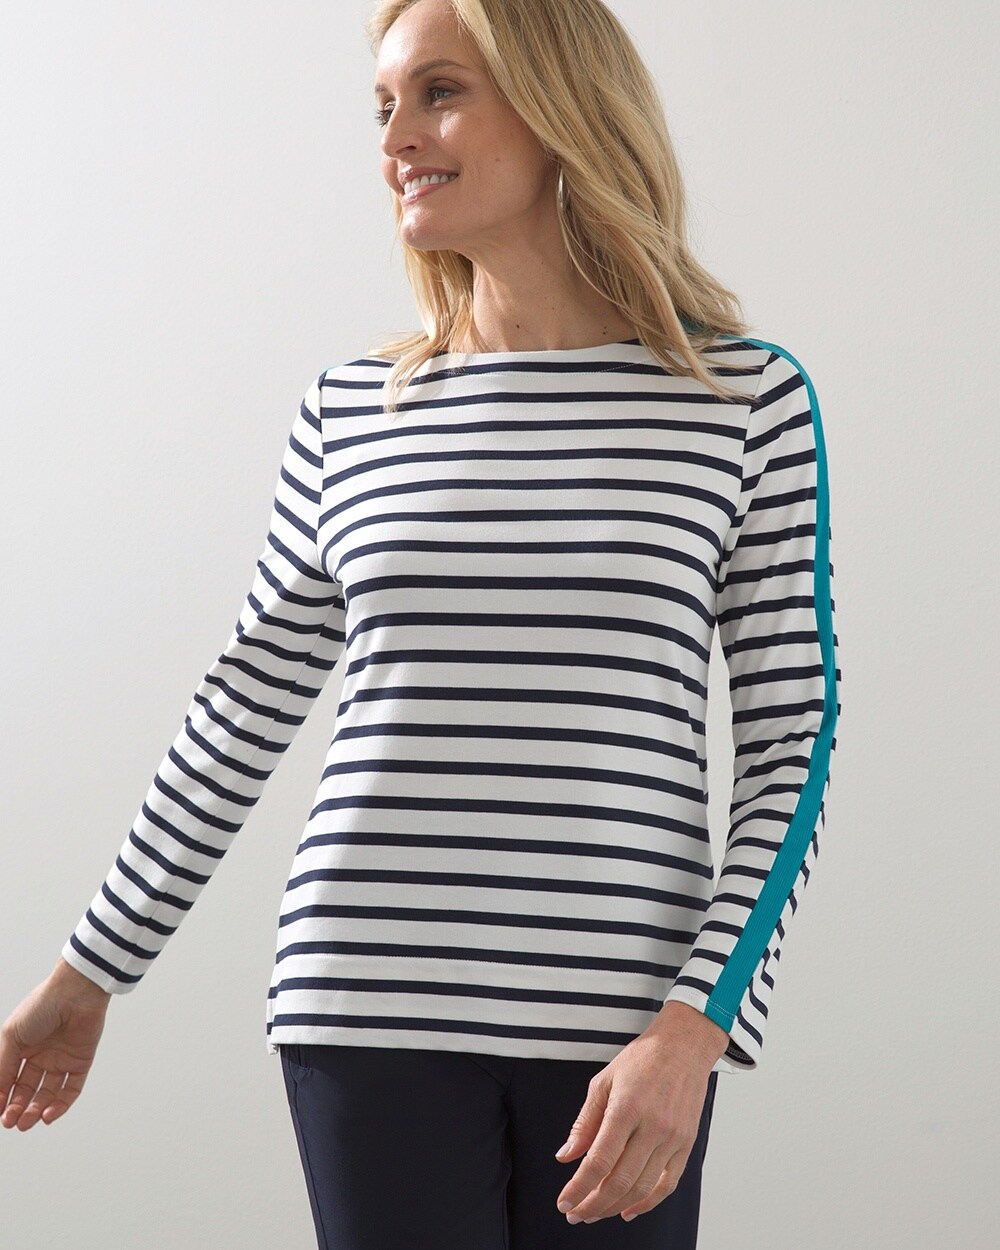 Zenergy French Terry Contrast Top